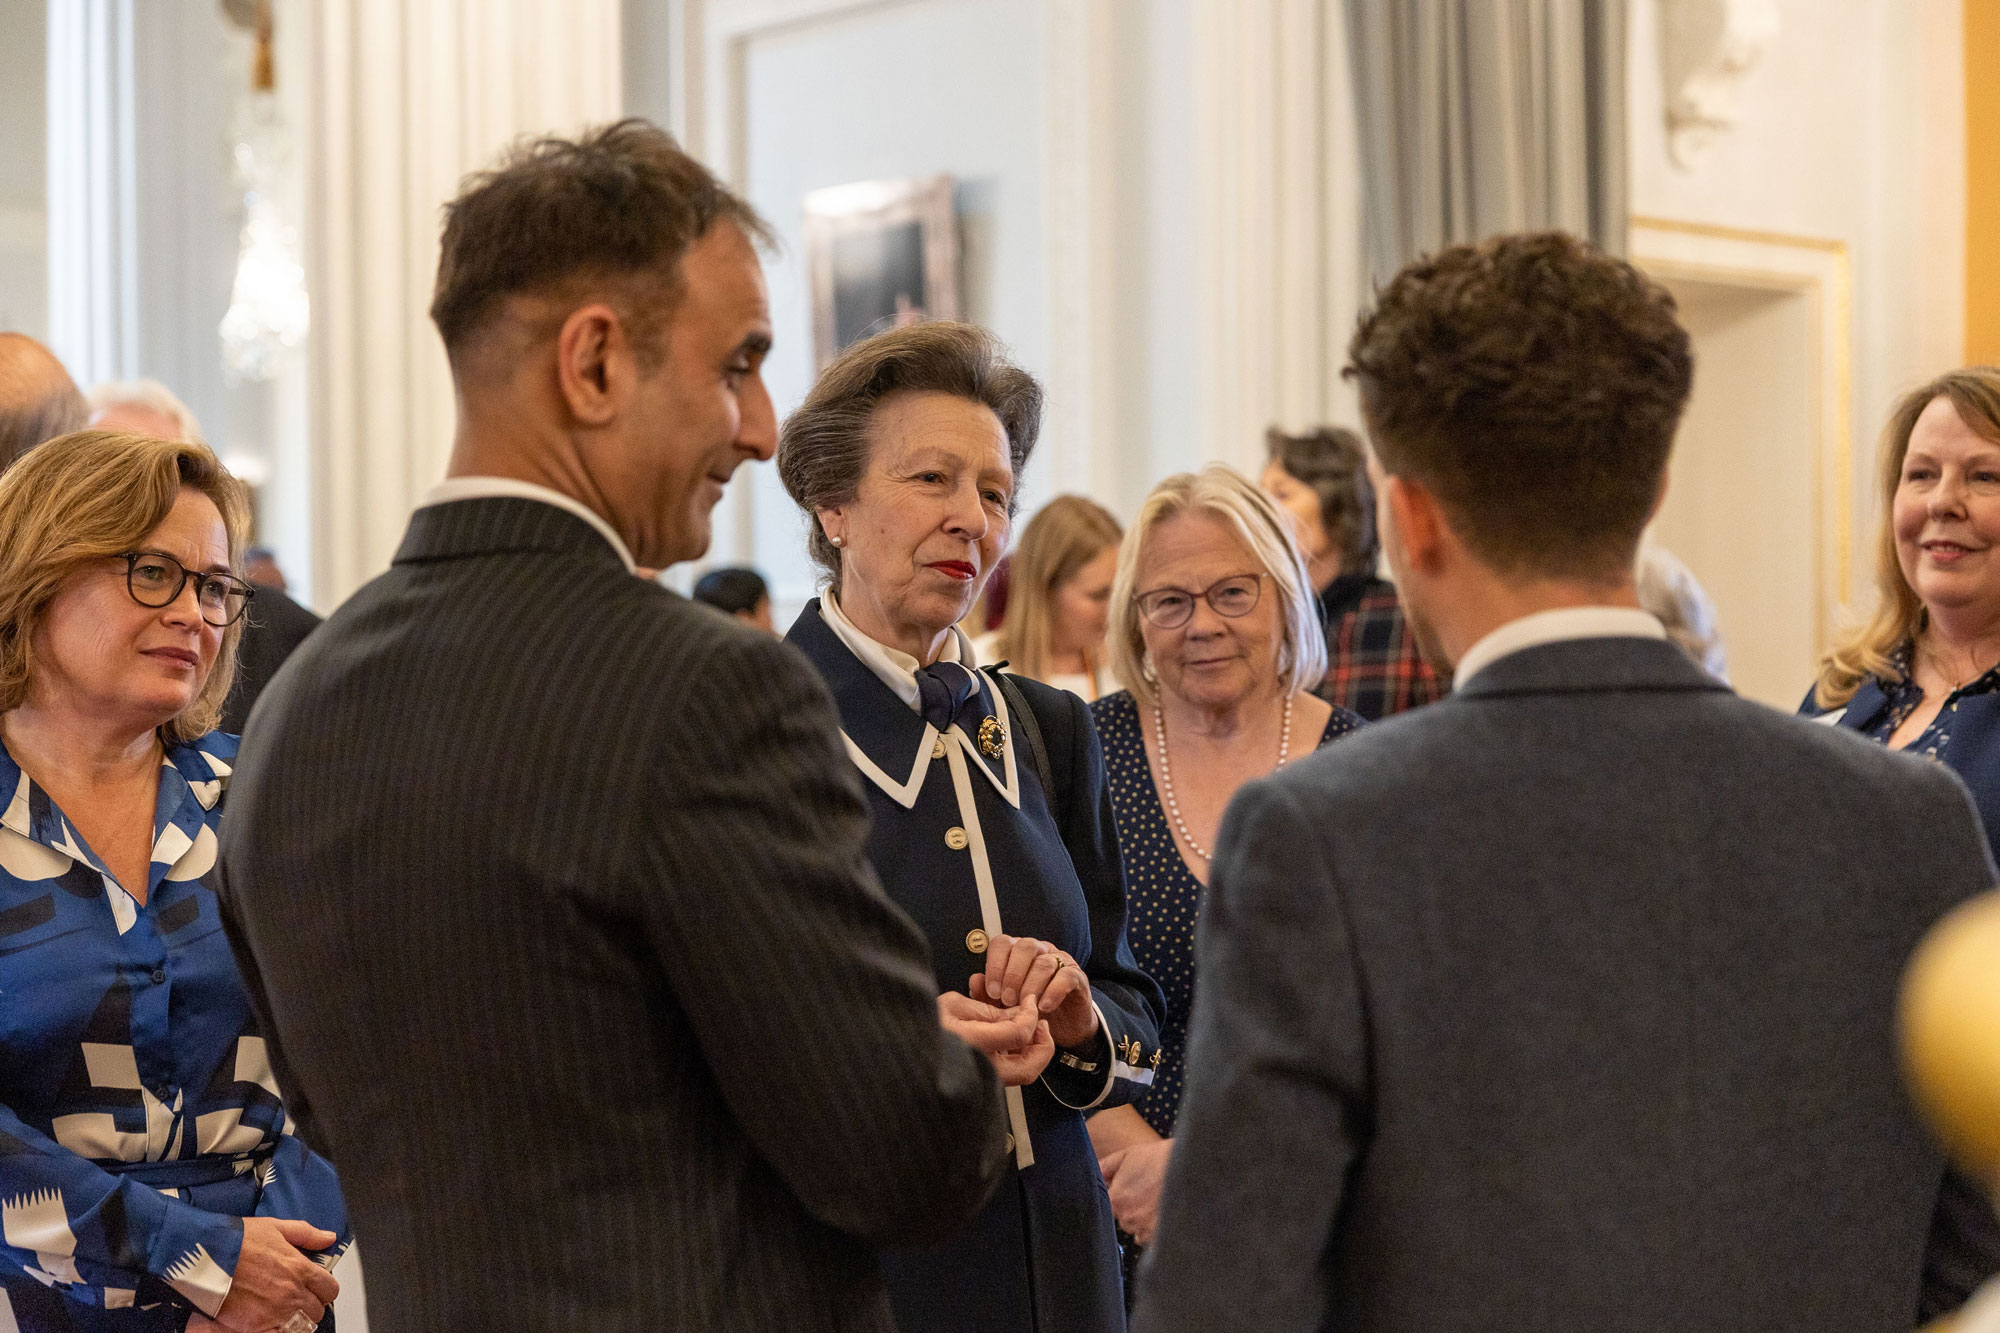 Kirstie Donnelly MBE, HRH The Princess Royal and Dame Ann Limb at the Princess Royal Training Awards 2021 ceremony